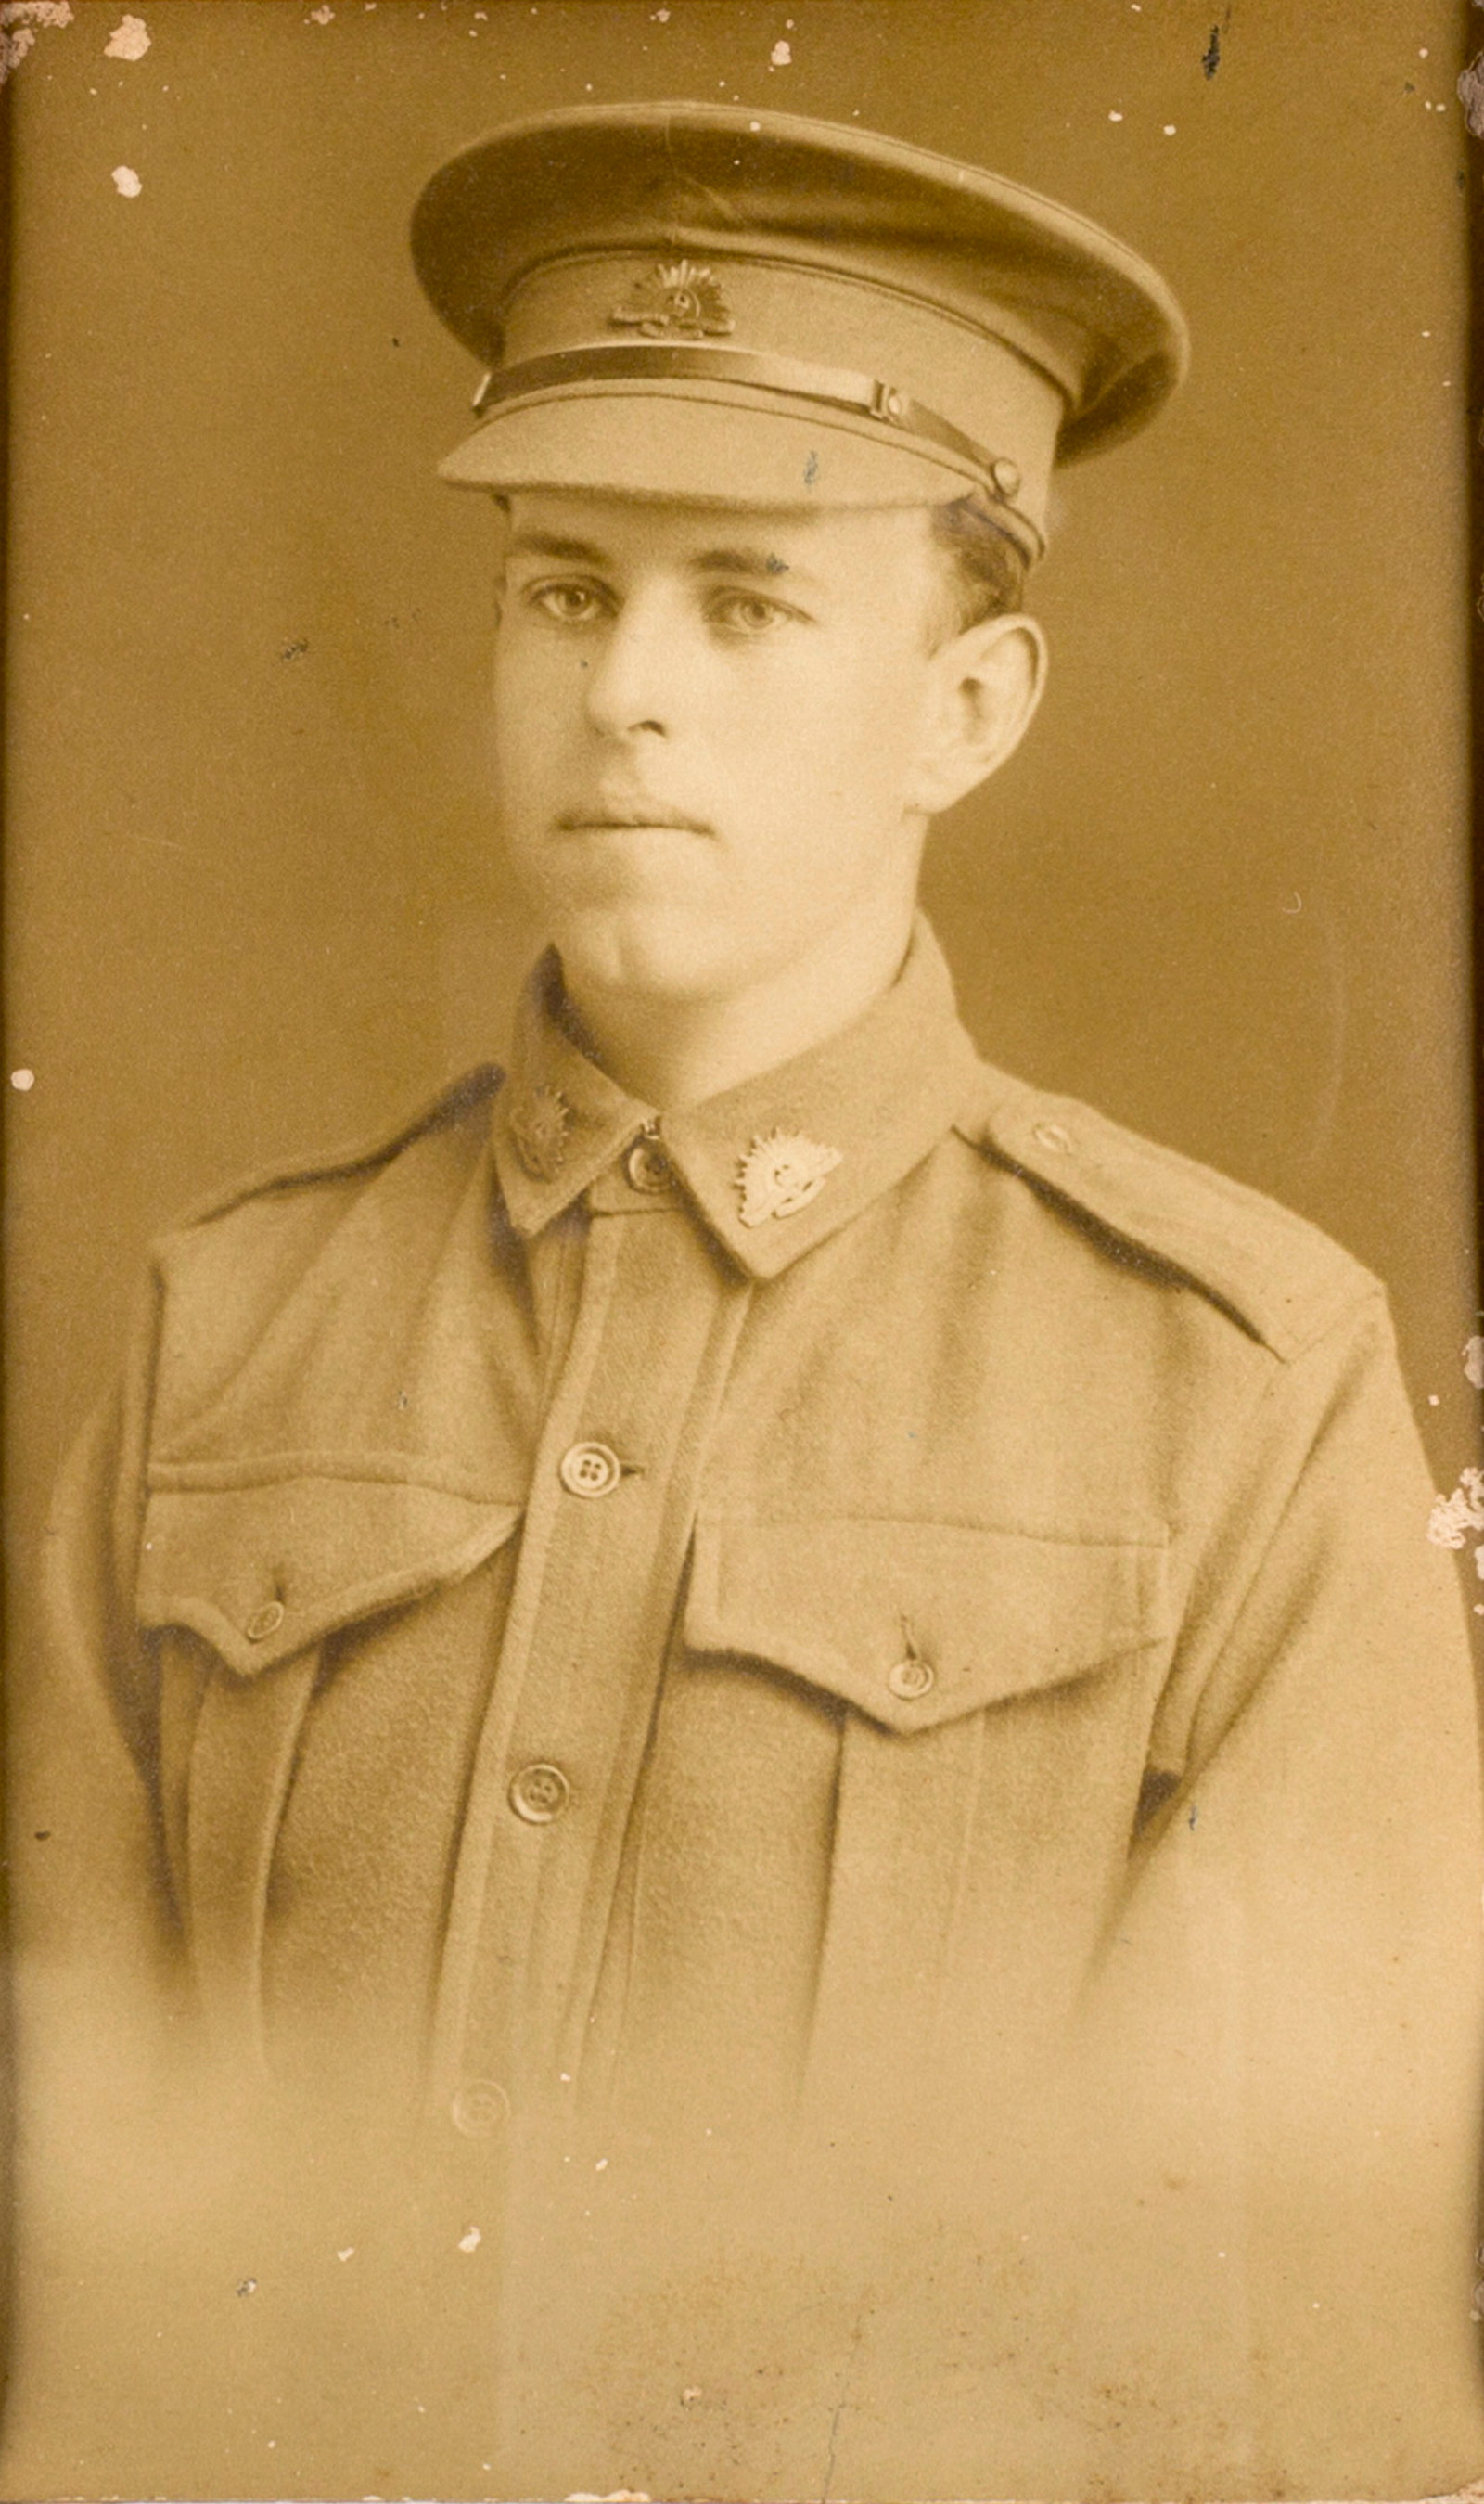 Sepia toned black and white photo of man in uniform.